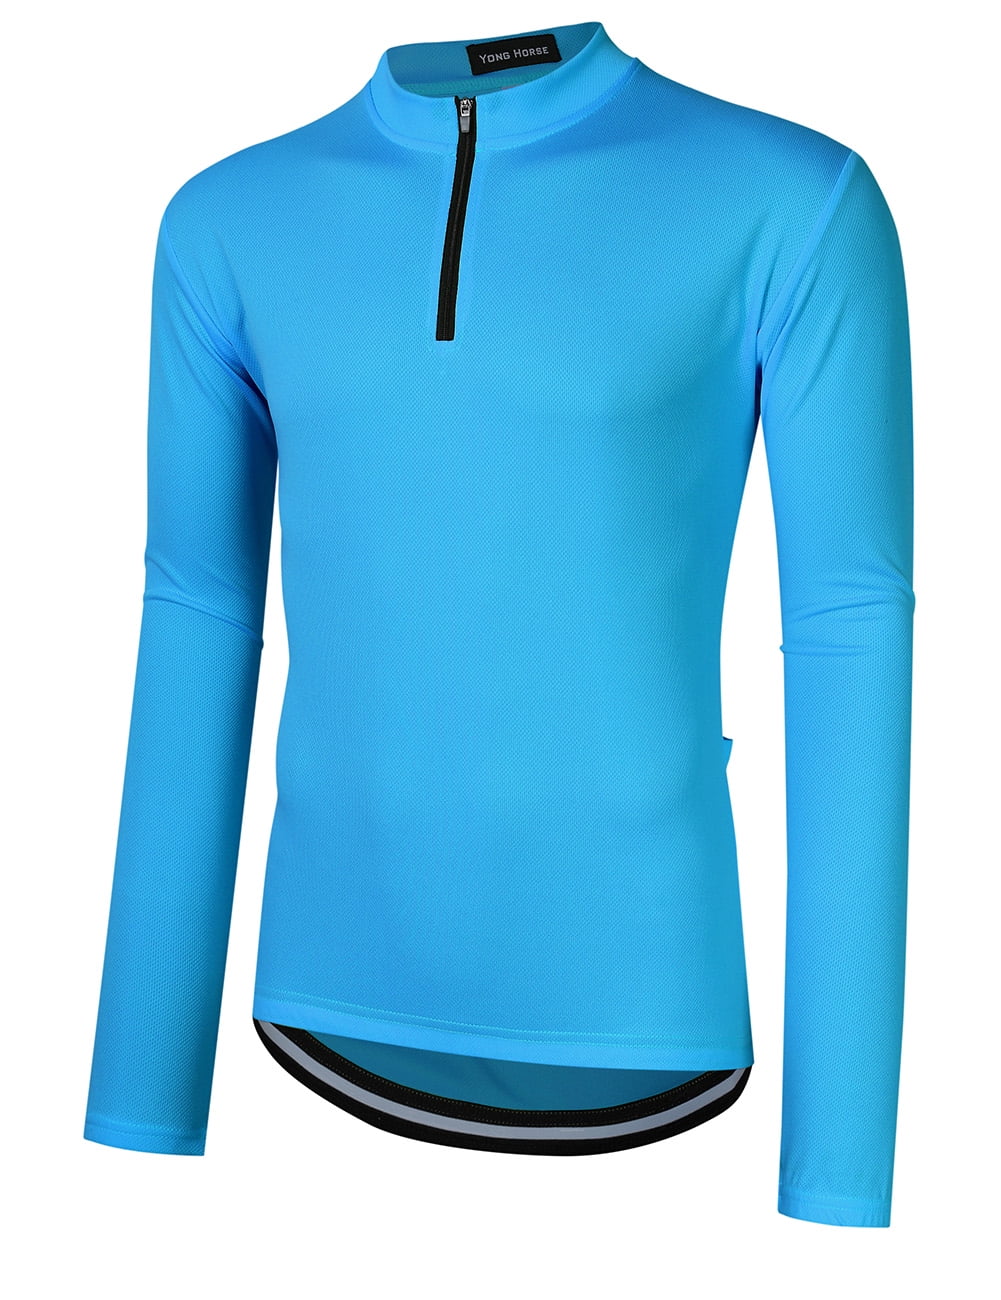 Details about   Men Cycling Clothing Set Winter Long Sleeve Windproof Jersey Jacket Trousers 